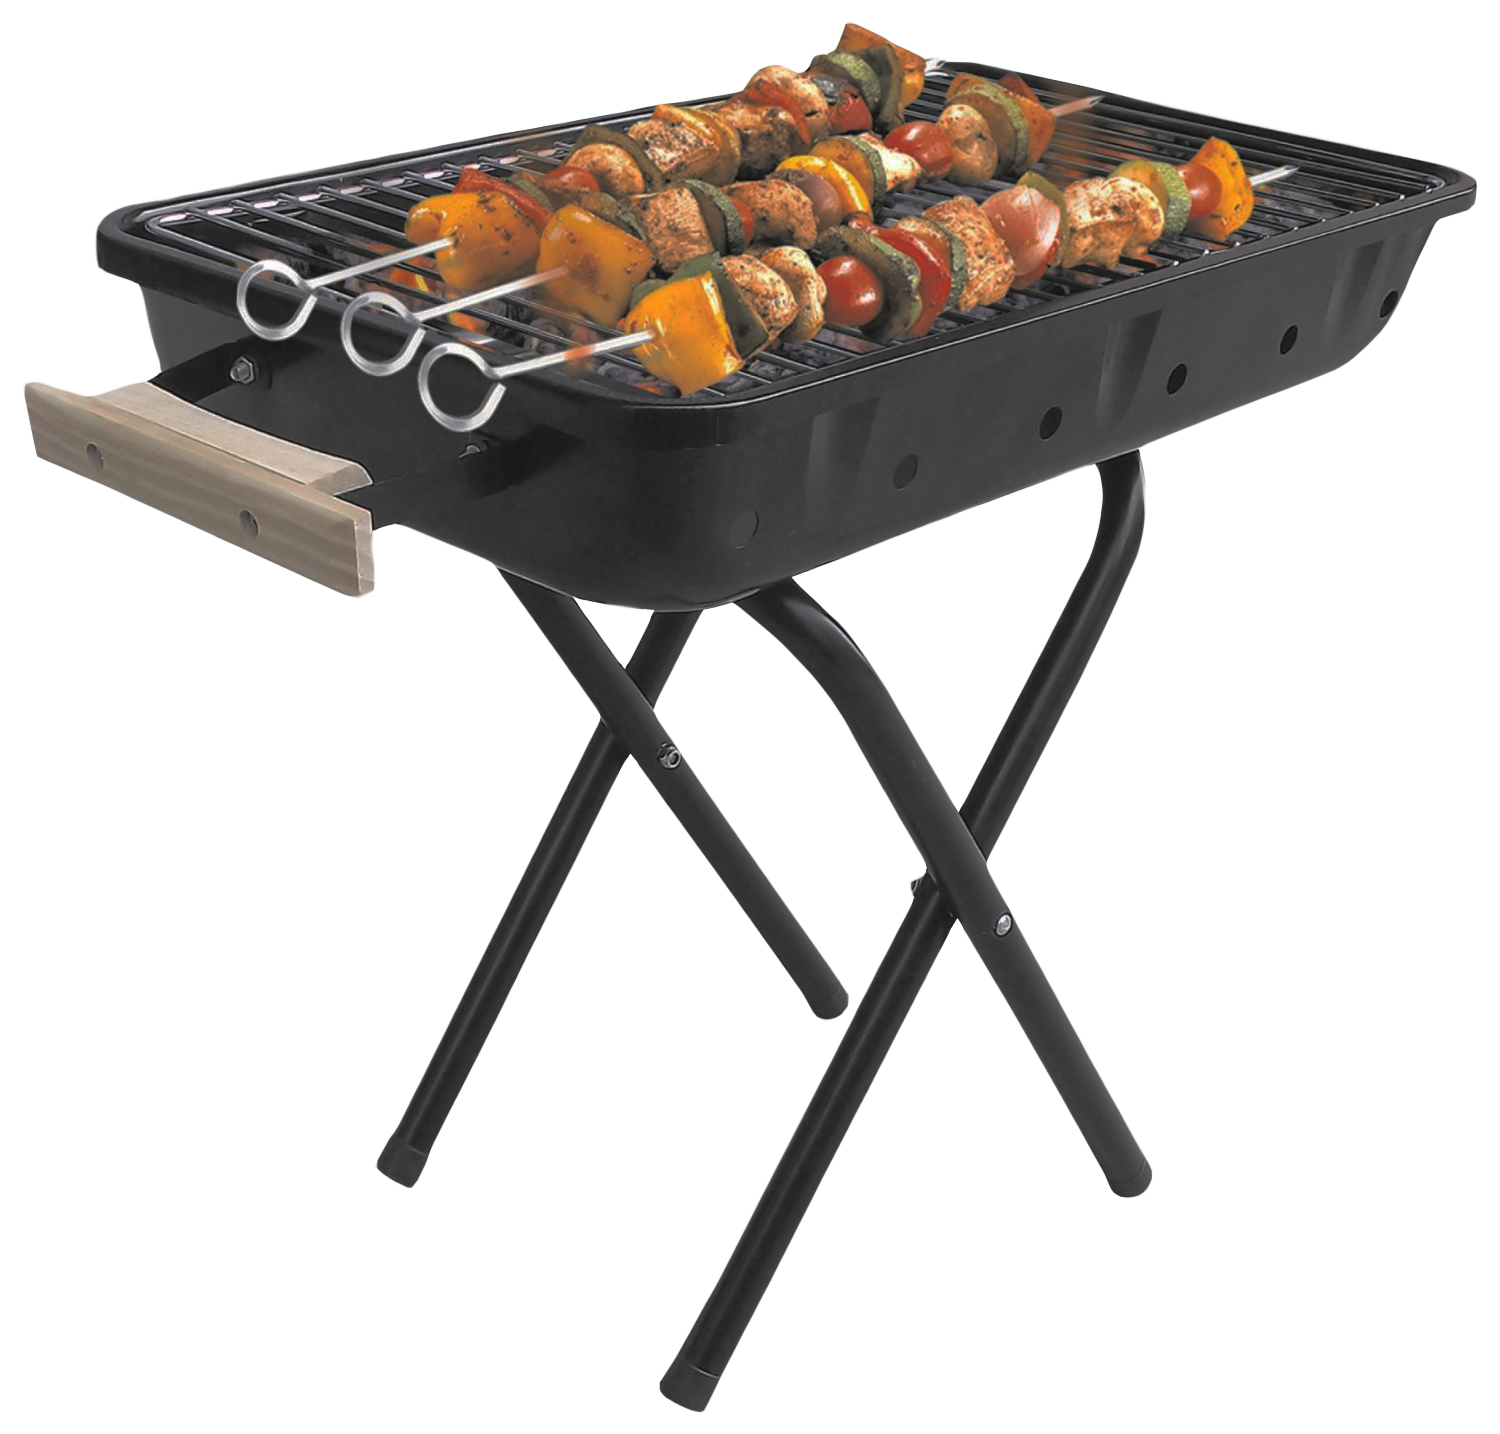 Bbq Grill transparent background PNG cliparts free download